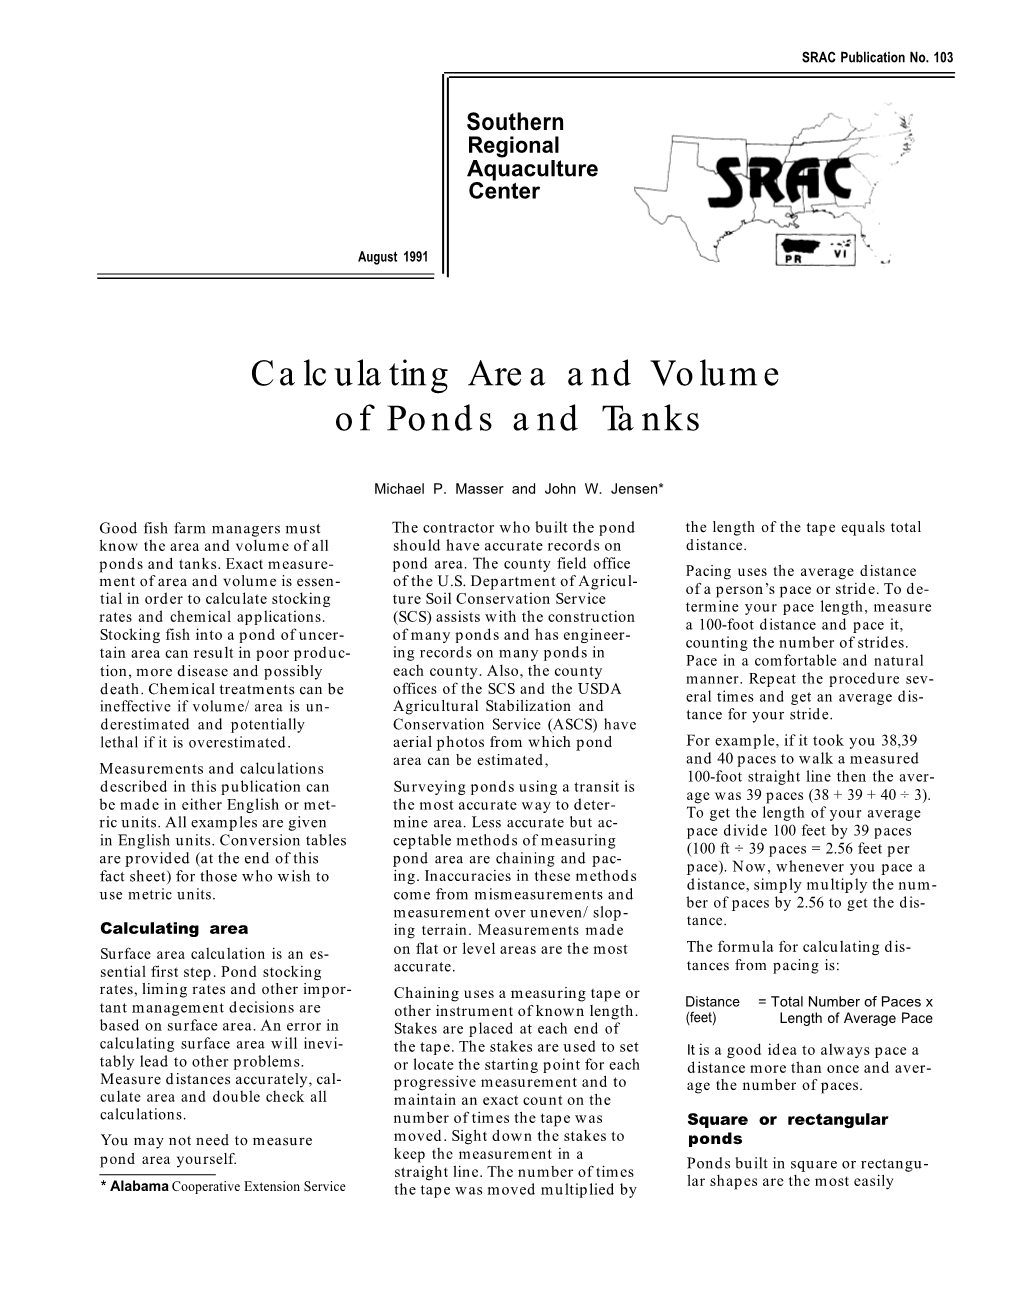 SRAC #103 Calculating Area and Volume of Ponds and Tanks